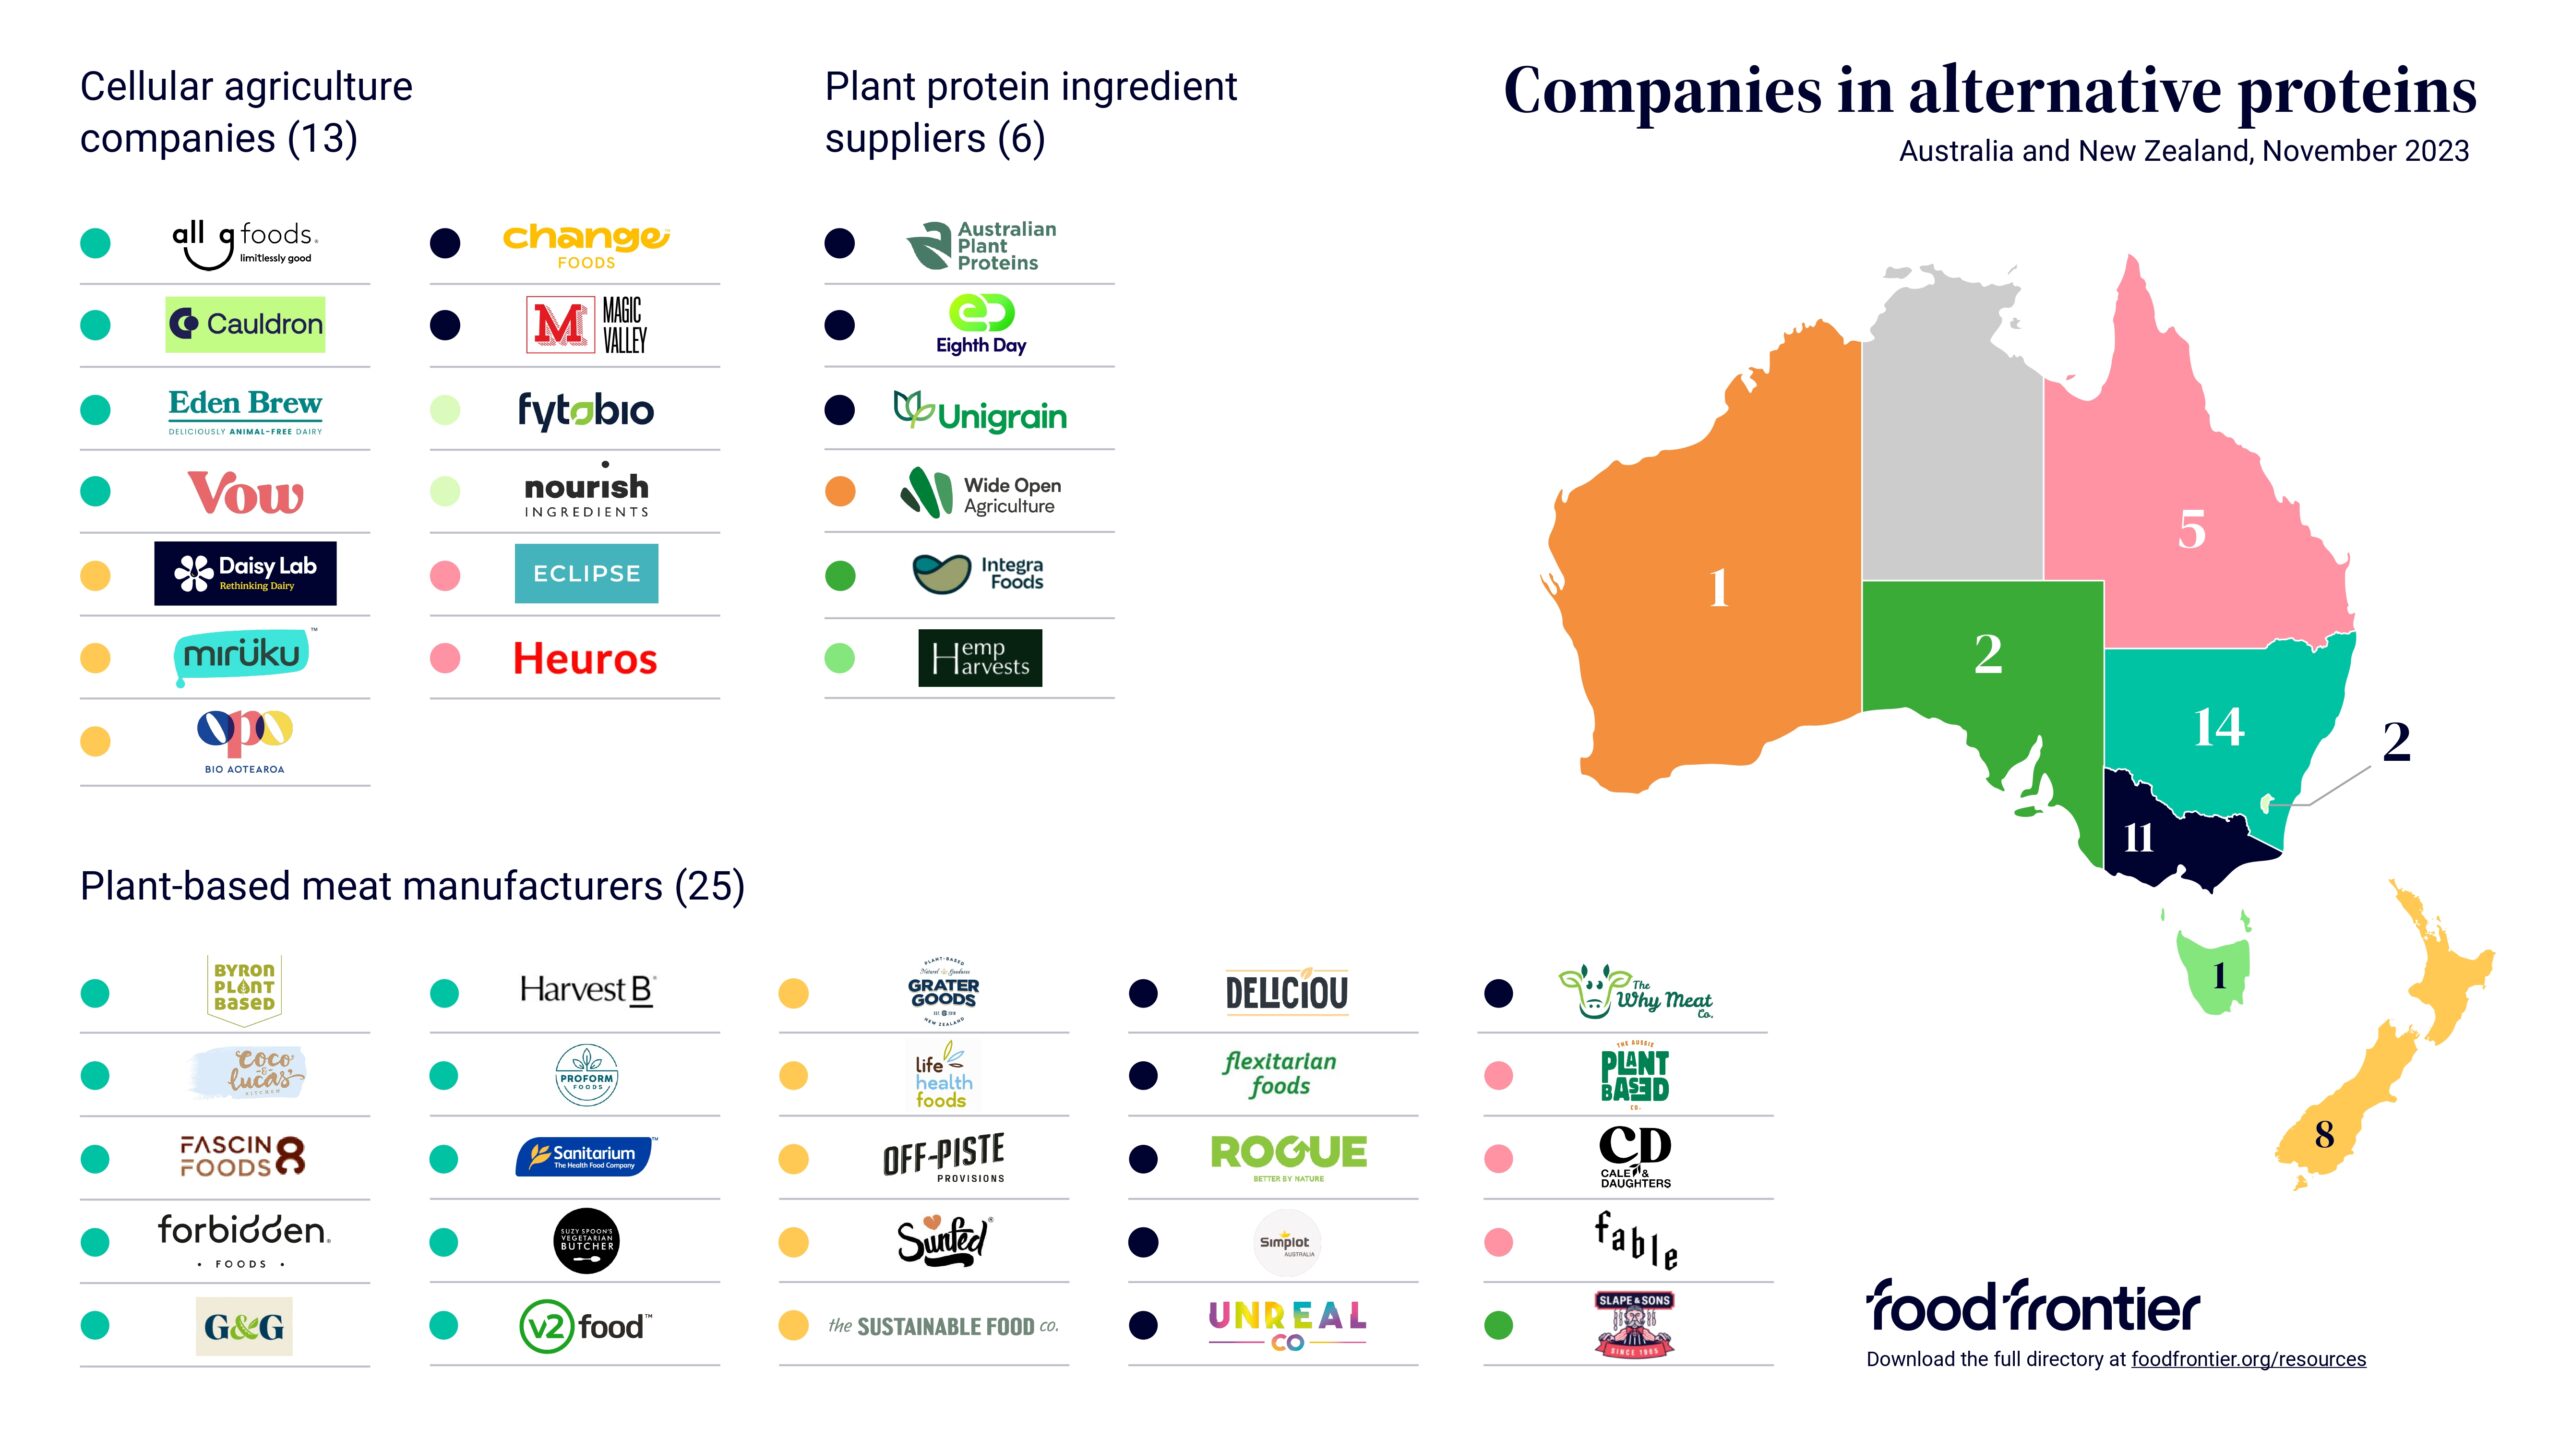 Companies in alternative proteins map: Australia and New Zealand